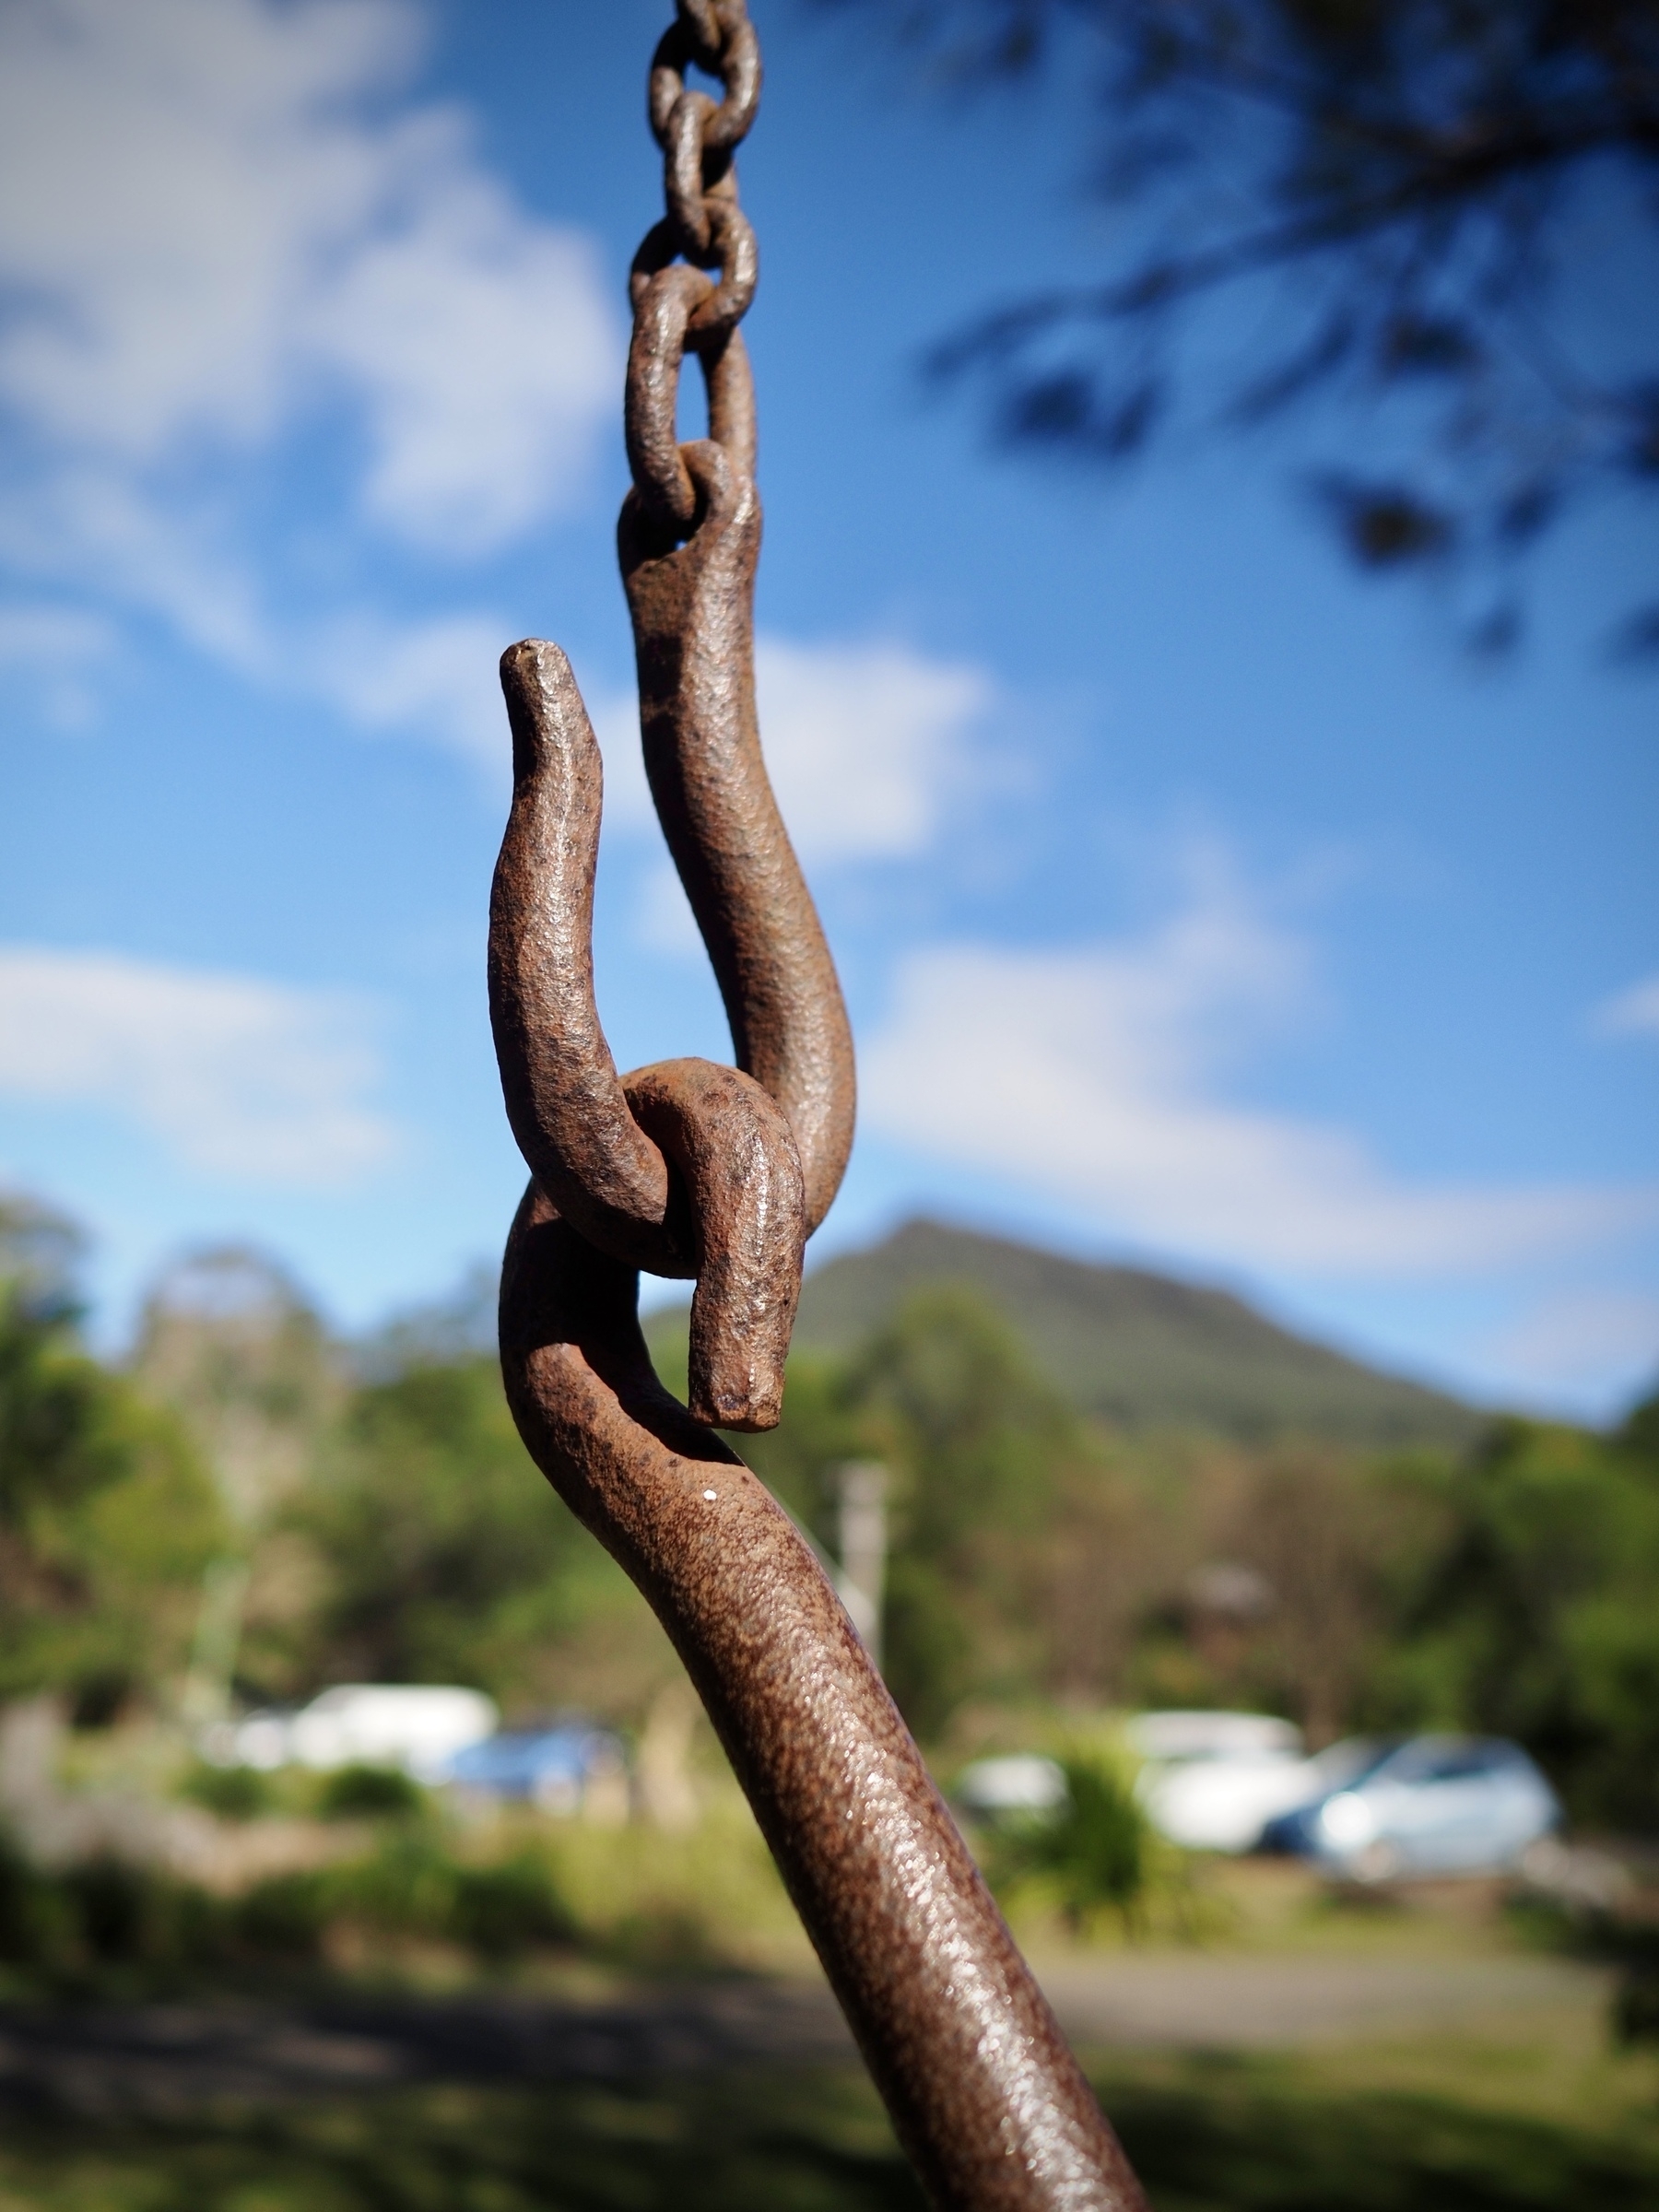 A close-up of two interlocked hooks with Djembla (or Mount Kembla) blurred in the distance